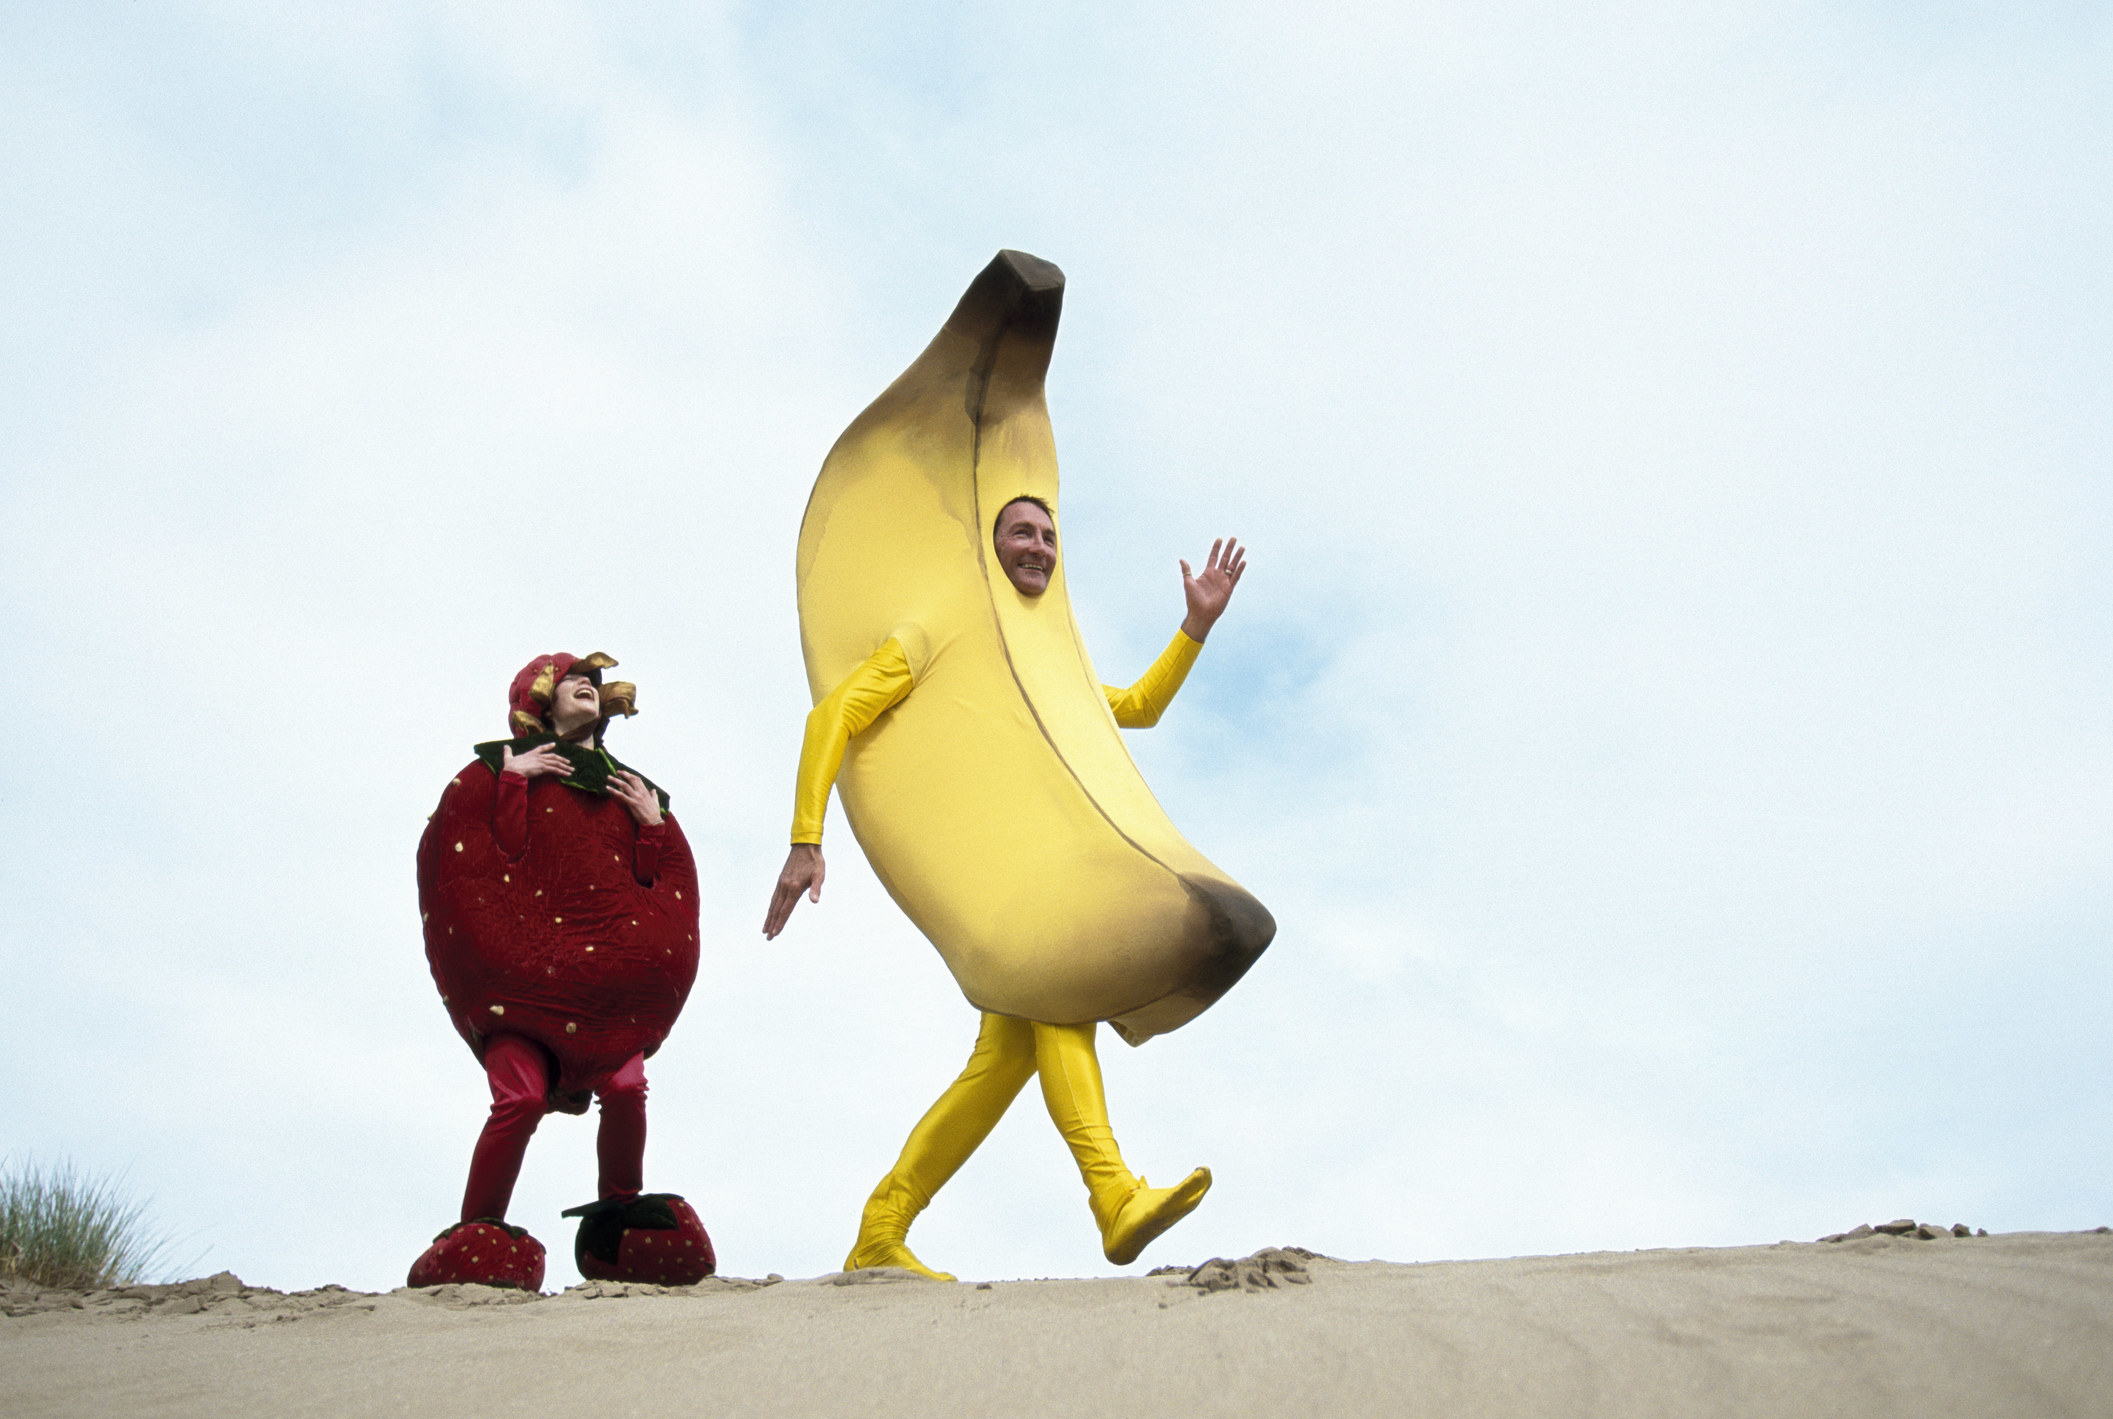 Man dressed as a banana and woman dressed as a strawberry on a beach